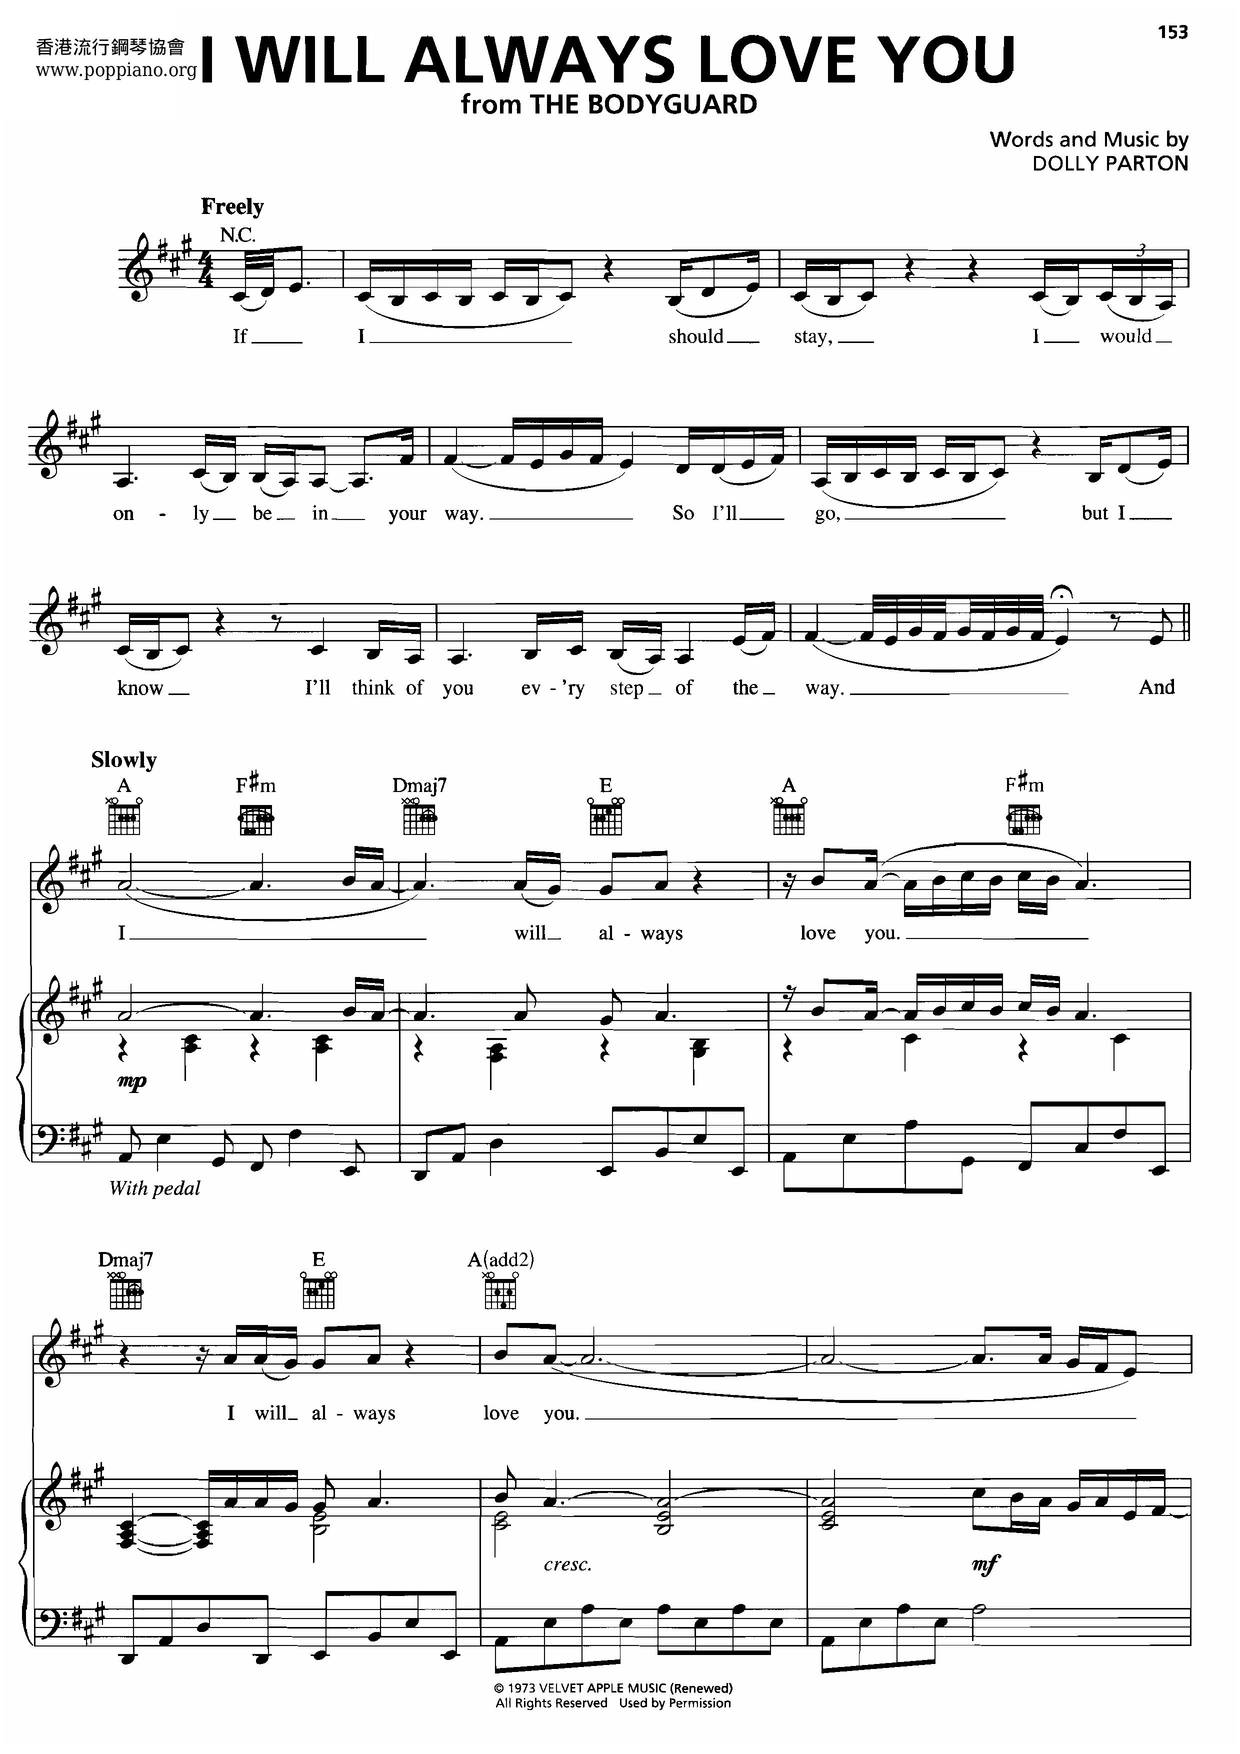 Whitney Houston Dolly Parton I Will Always Love You Sheet Music Pdf オールウェイズラブユー 楽譜 Free Score Download